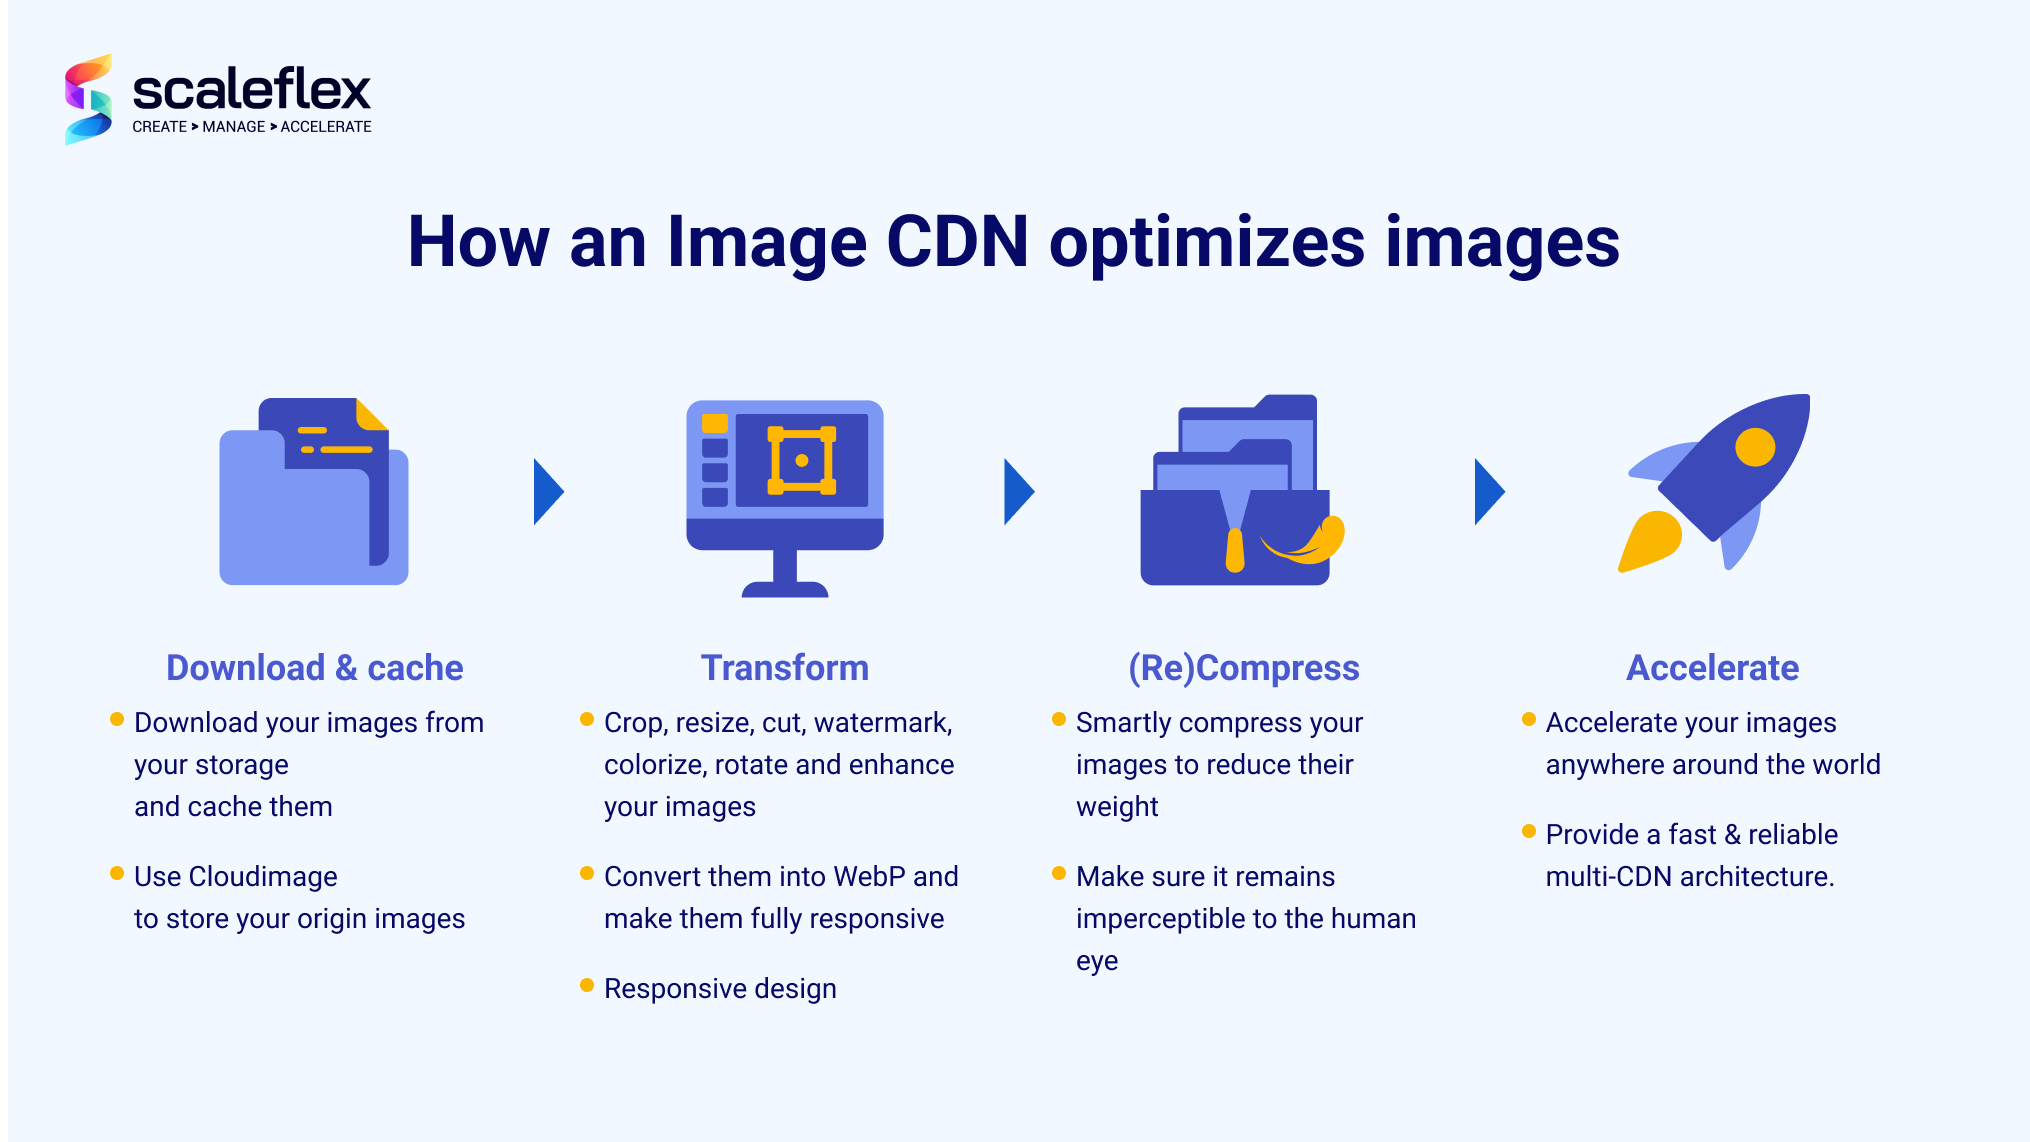 The standard process of how an Image CDN optimizes images